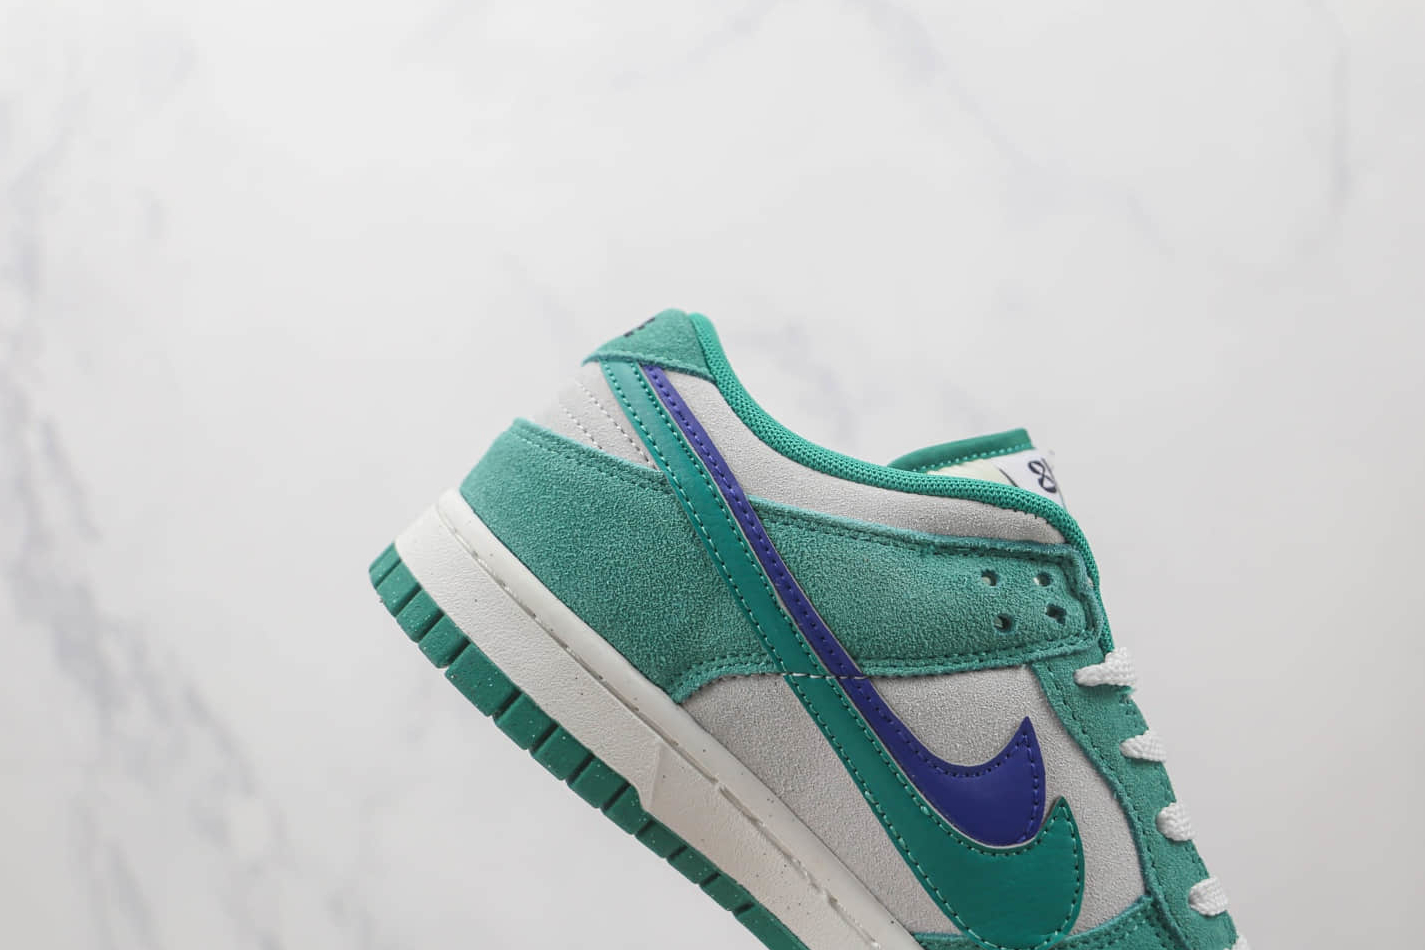 Nike Dunk Low SE 'Sail Neptune Green' DO9457-101 - Latest Release, Limited Edition